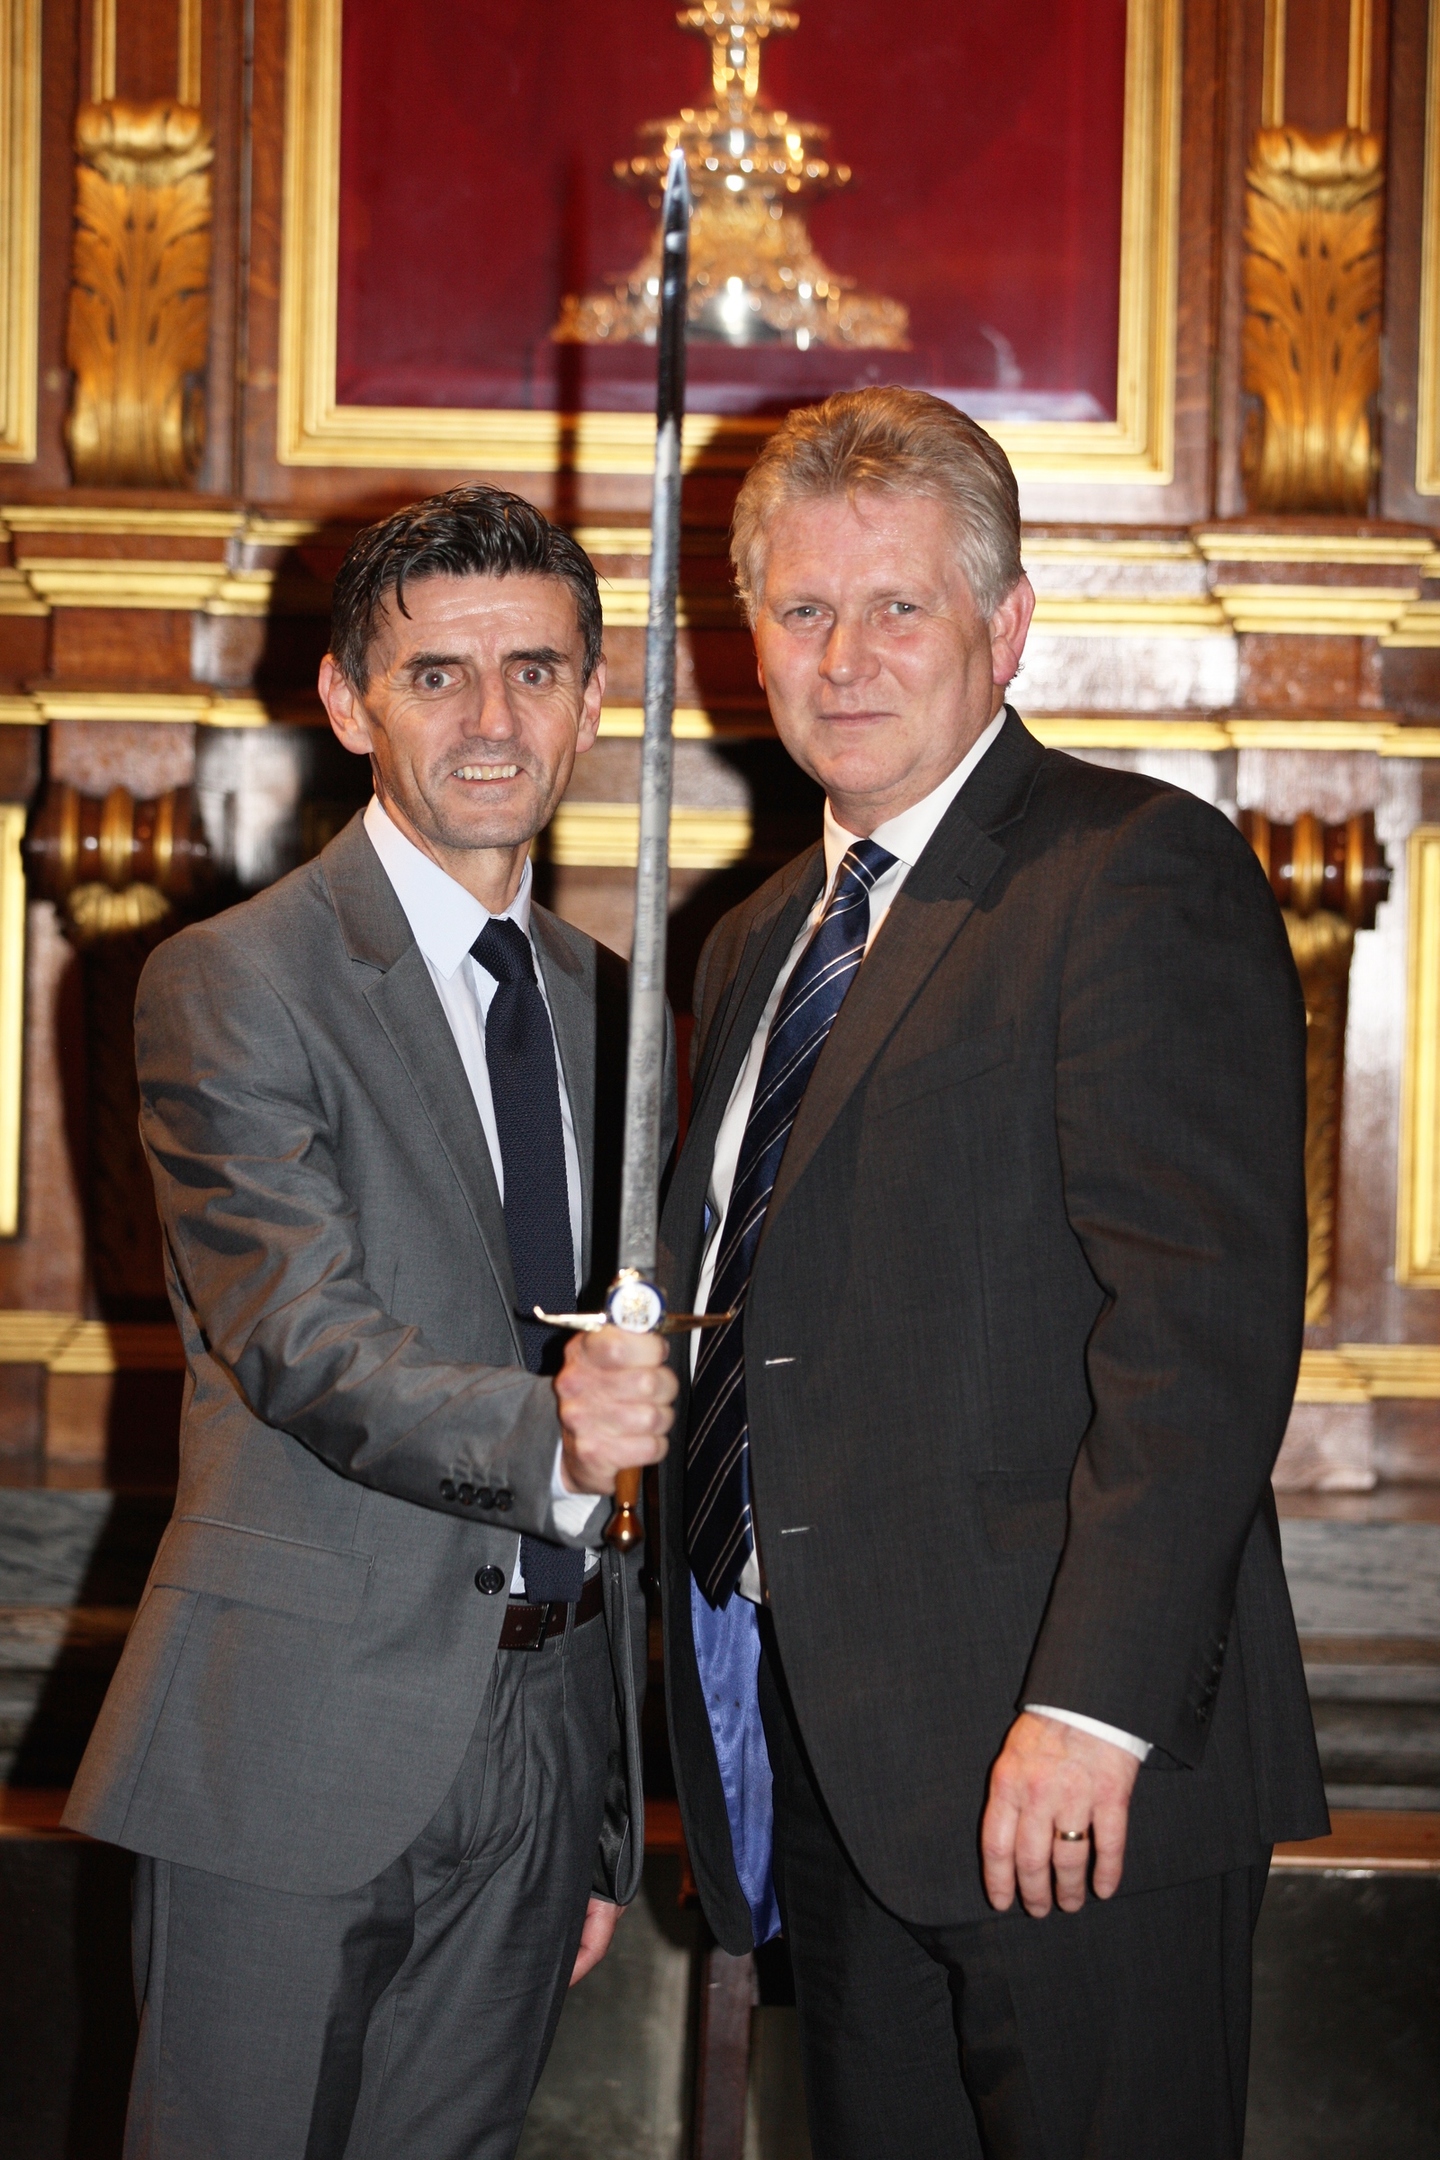 North Star safety manager, Paul Craig (left), is presented with the prestigious Sword of Honour award by Mike Robinson, chief executive of the British Safety Council